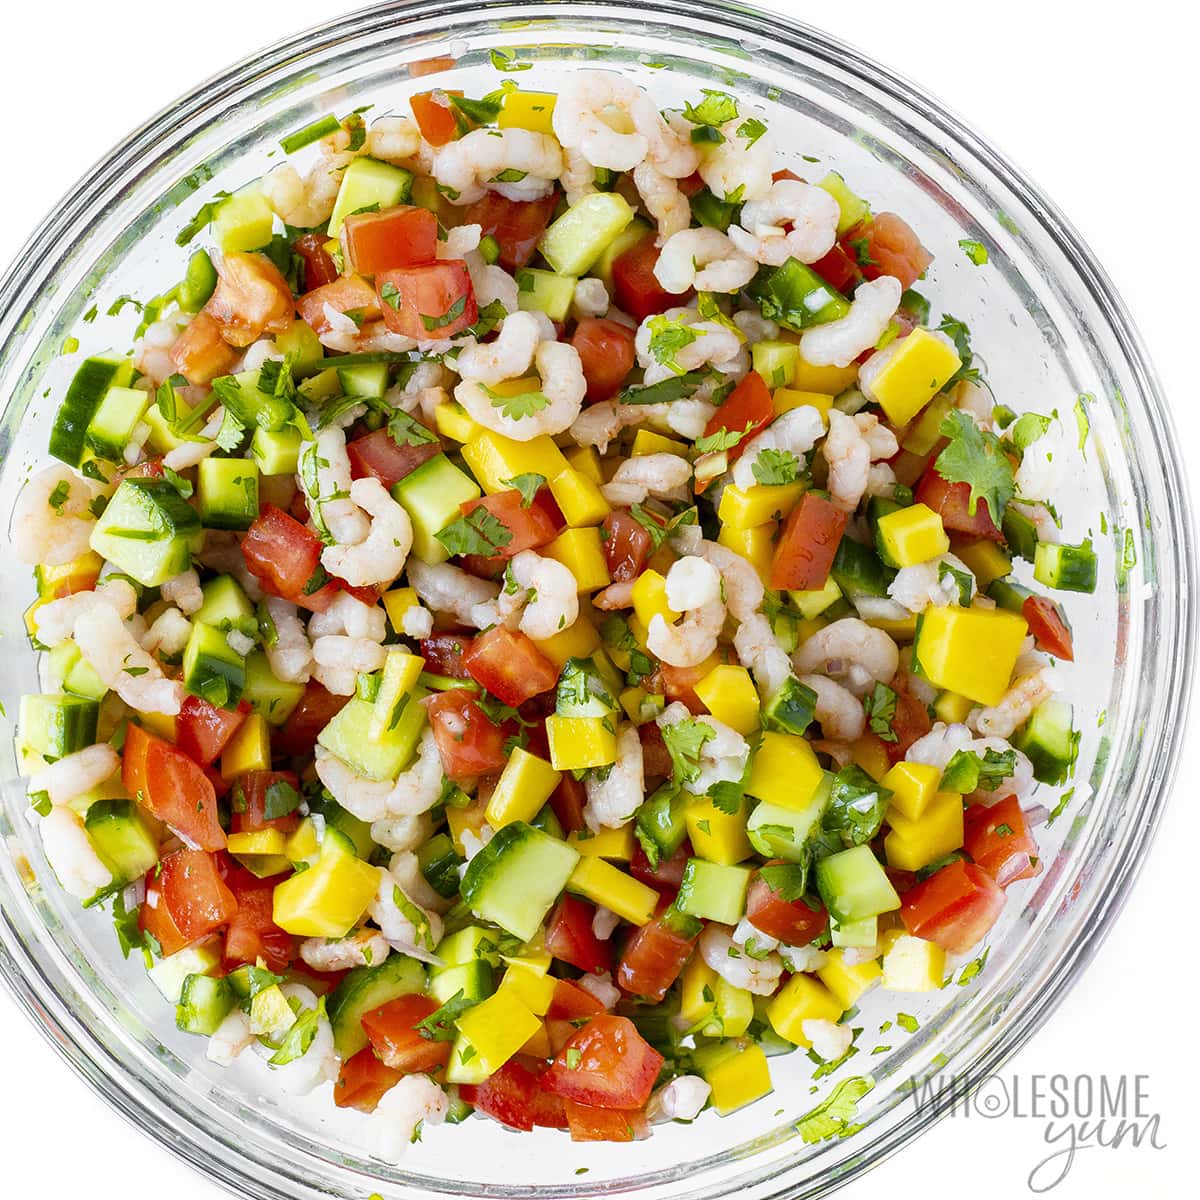 Fully mixed shrimp ceviche recipe in a glass bowl.